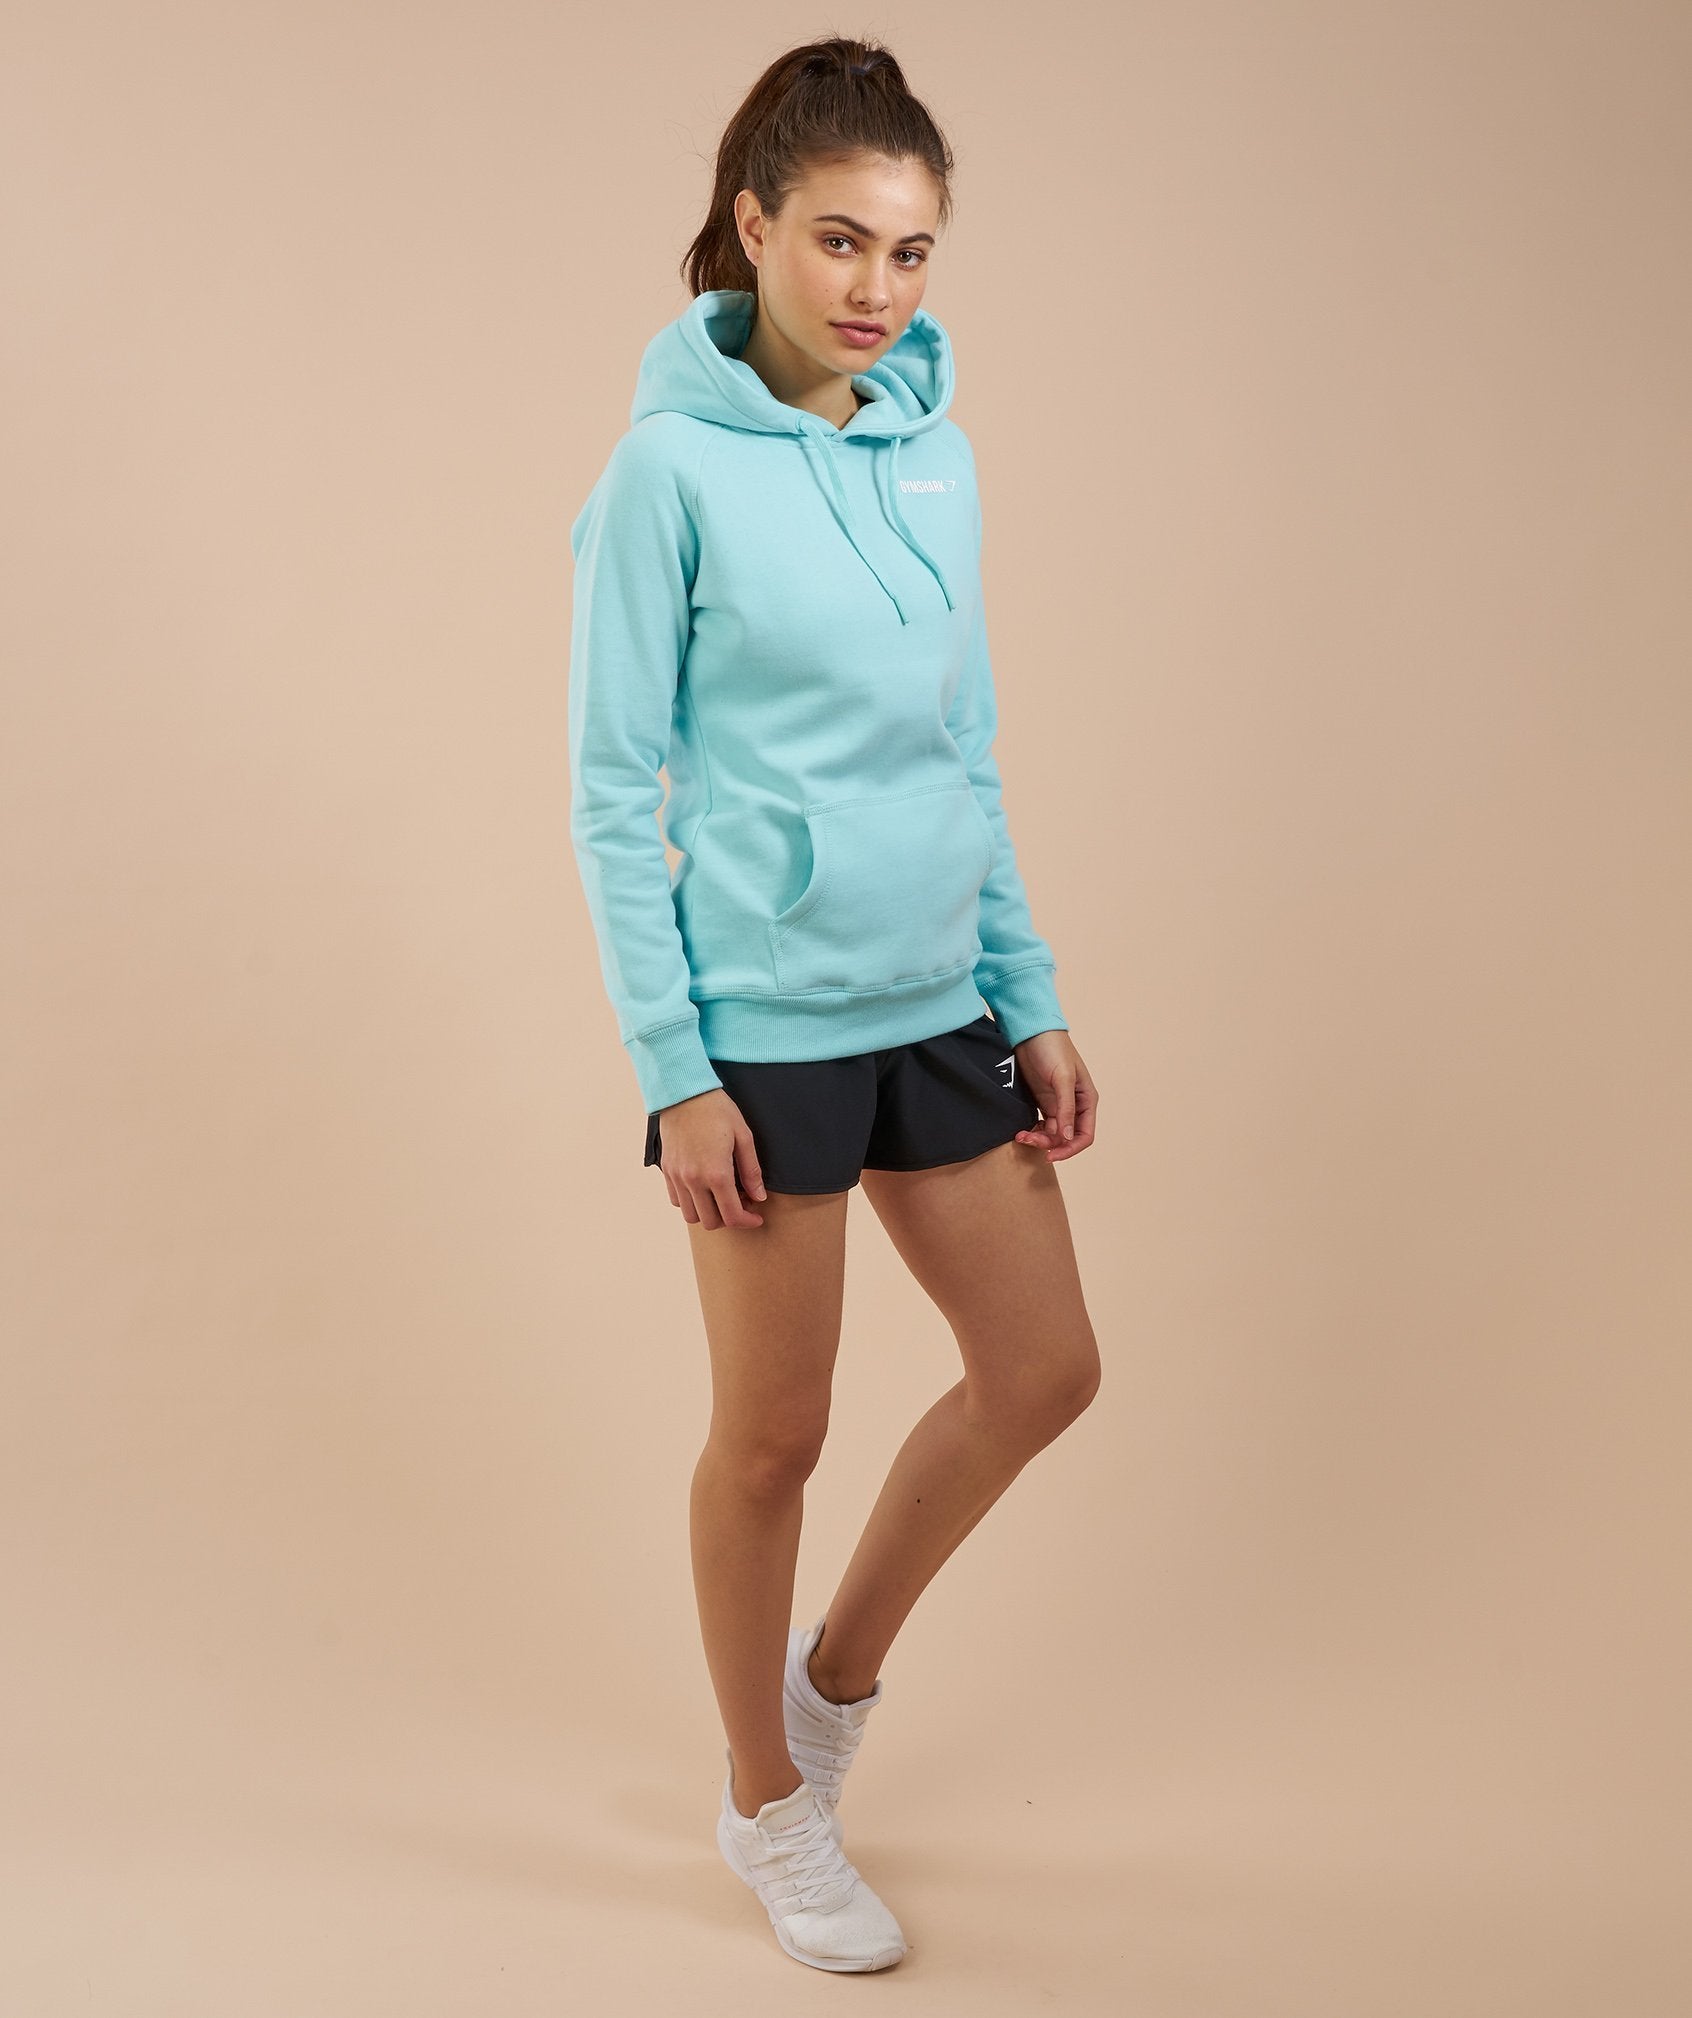 Women's Crest Hoodie in Pale Turquoise - view 6